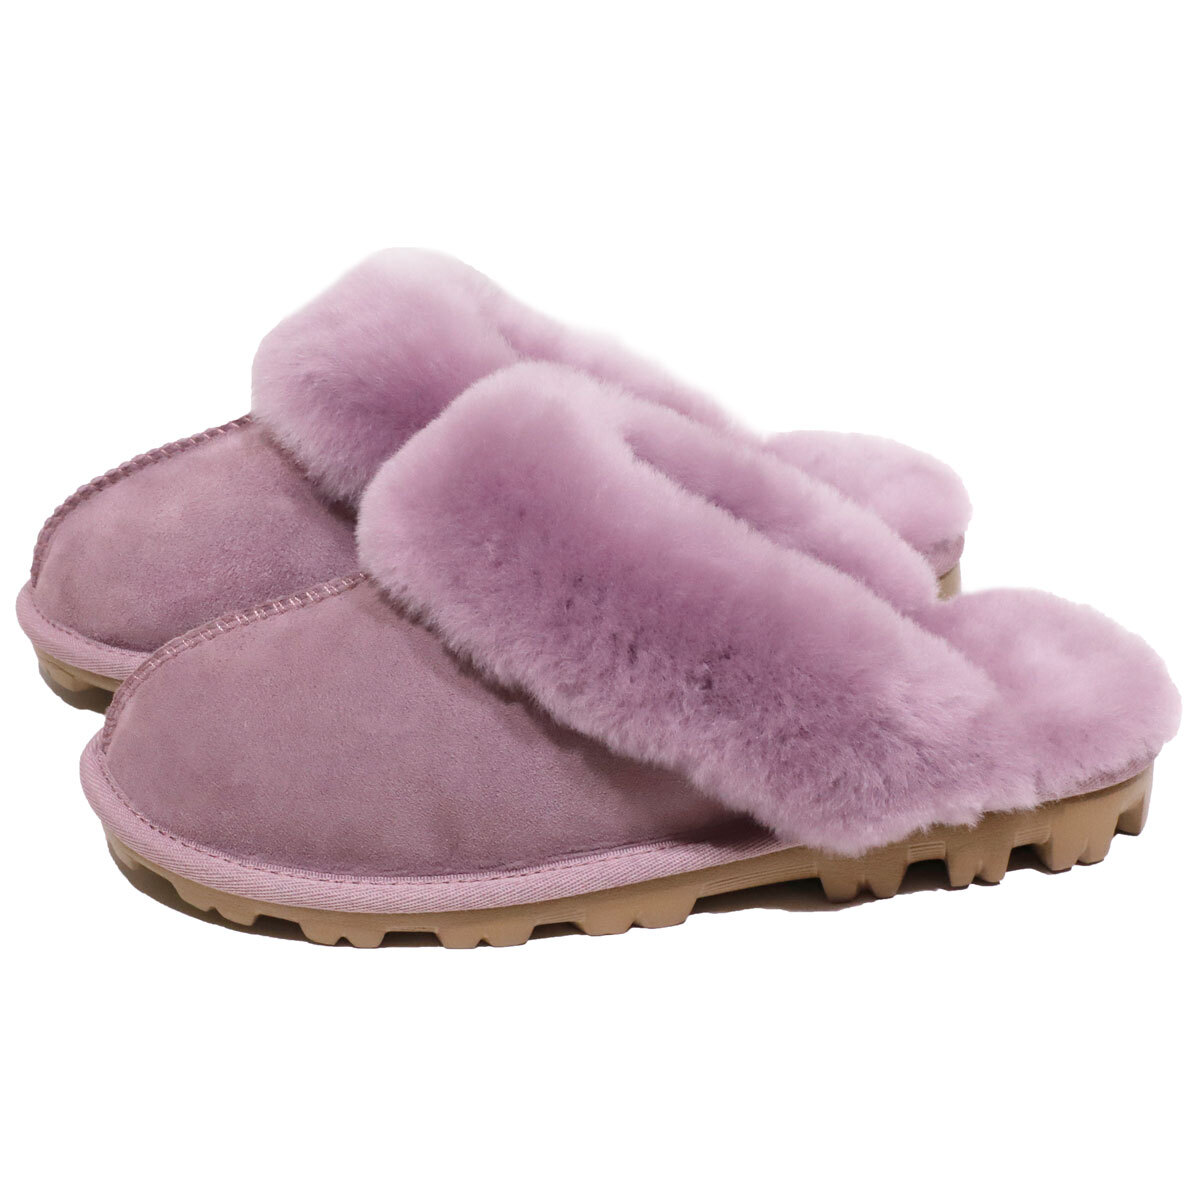 Shearling Slippers in Mauve, Size 